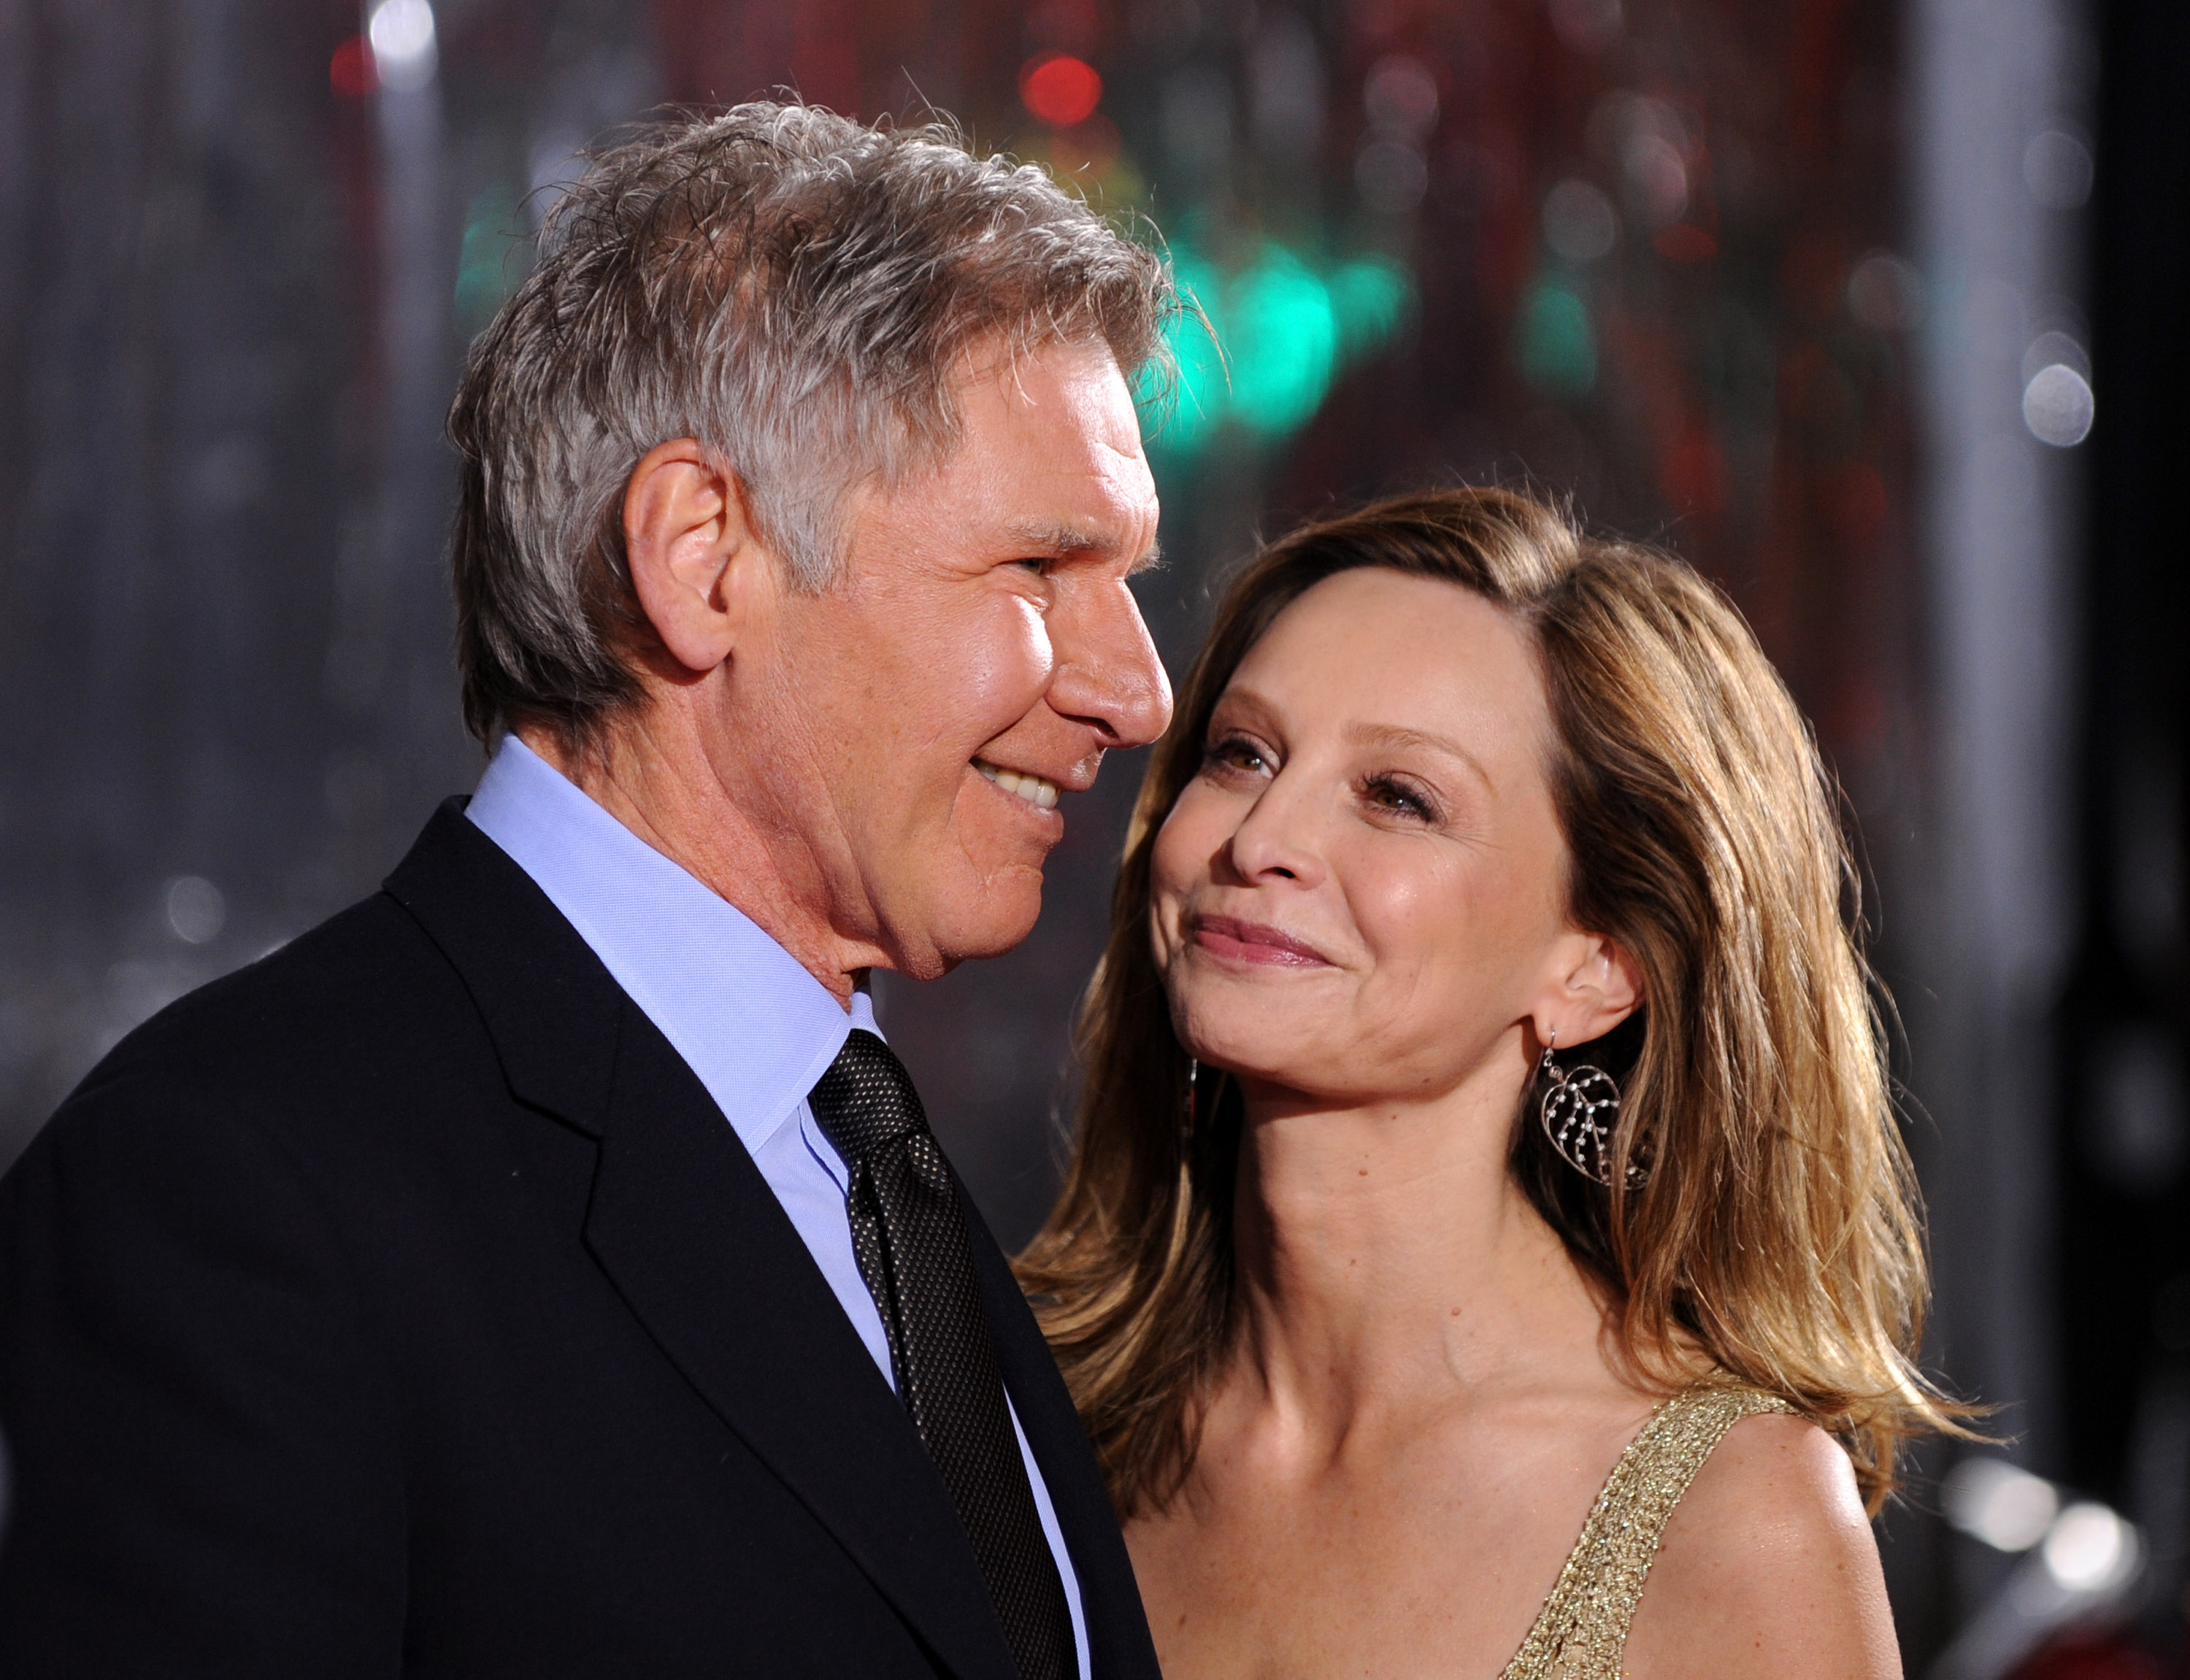 Harrison Ford and Calista Flockhart at the Grauman's Chinese Theatre on January 19, 2010 in Hollywood, California | Source: Getty Images